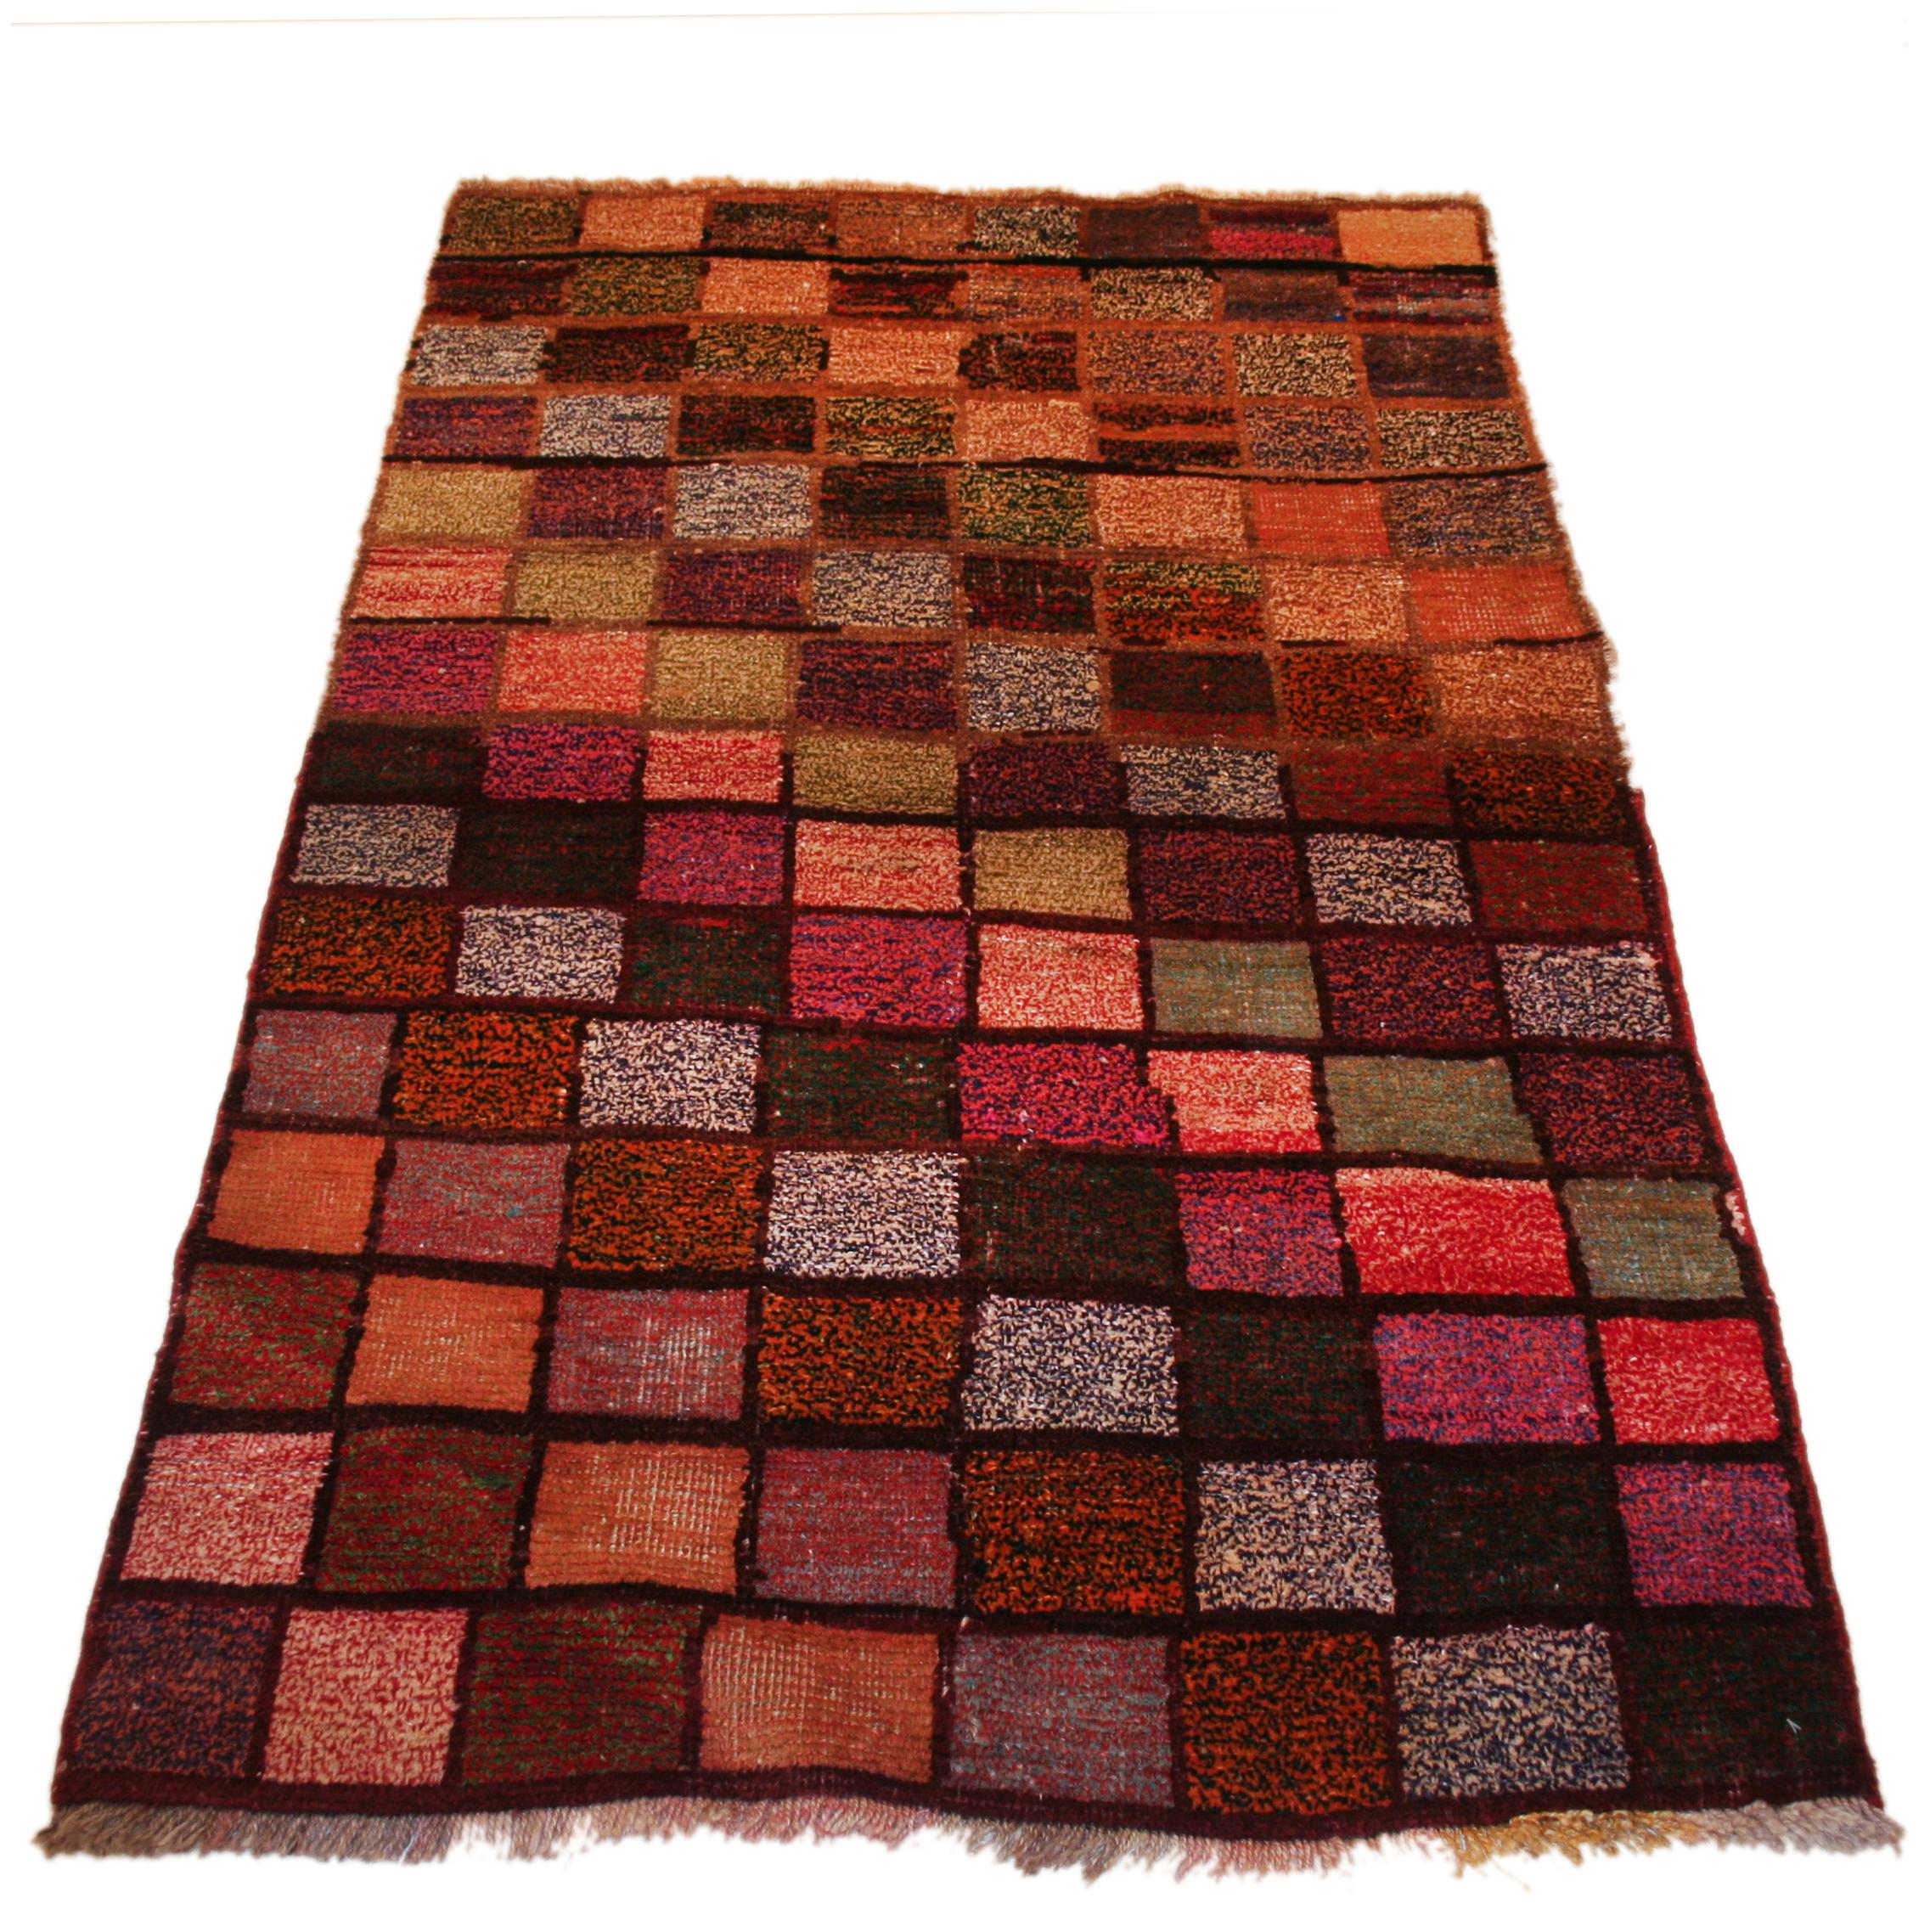 Tulu rugs represent one of the earliest forms of nomadic pile weaving, typically knotted with a medium-high pile as they were meant as bedding rugs for the tent. The patterns are typically quite simple, ranging from completely open fields to stacked